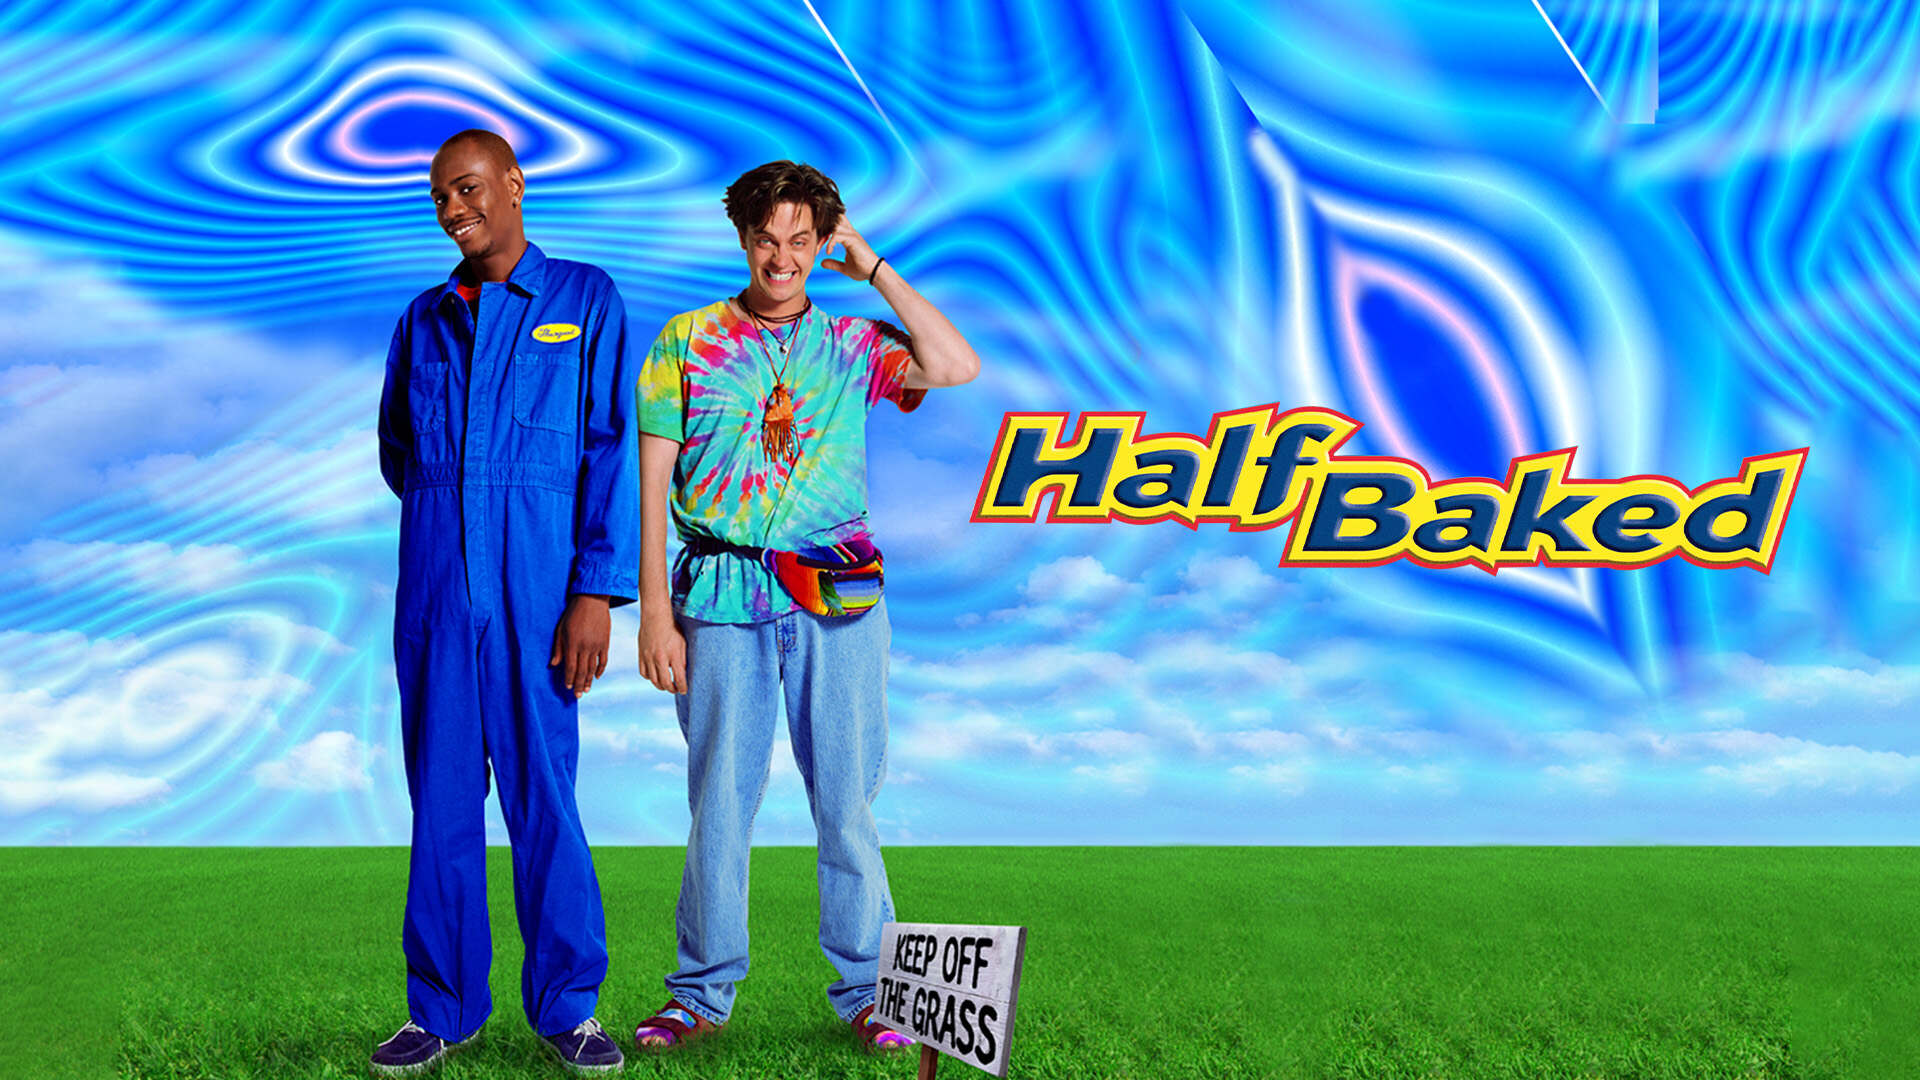 35-facts-about-the-movie-half-baked